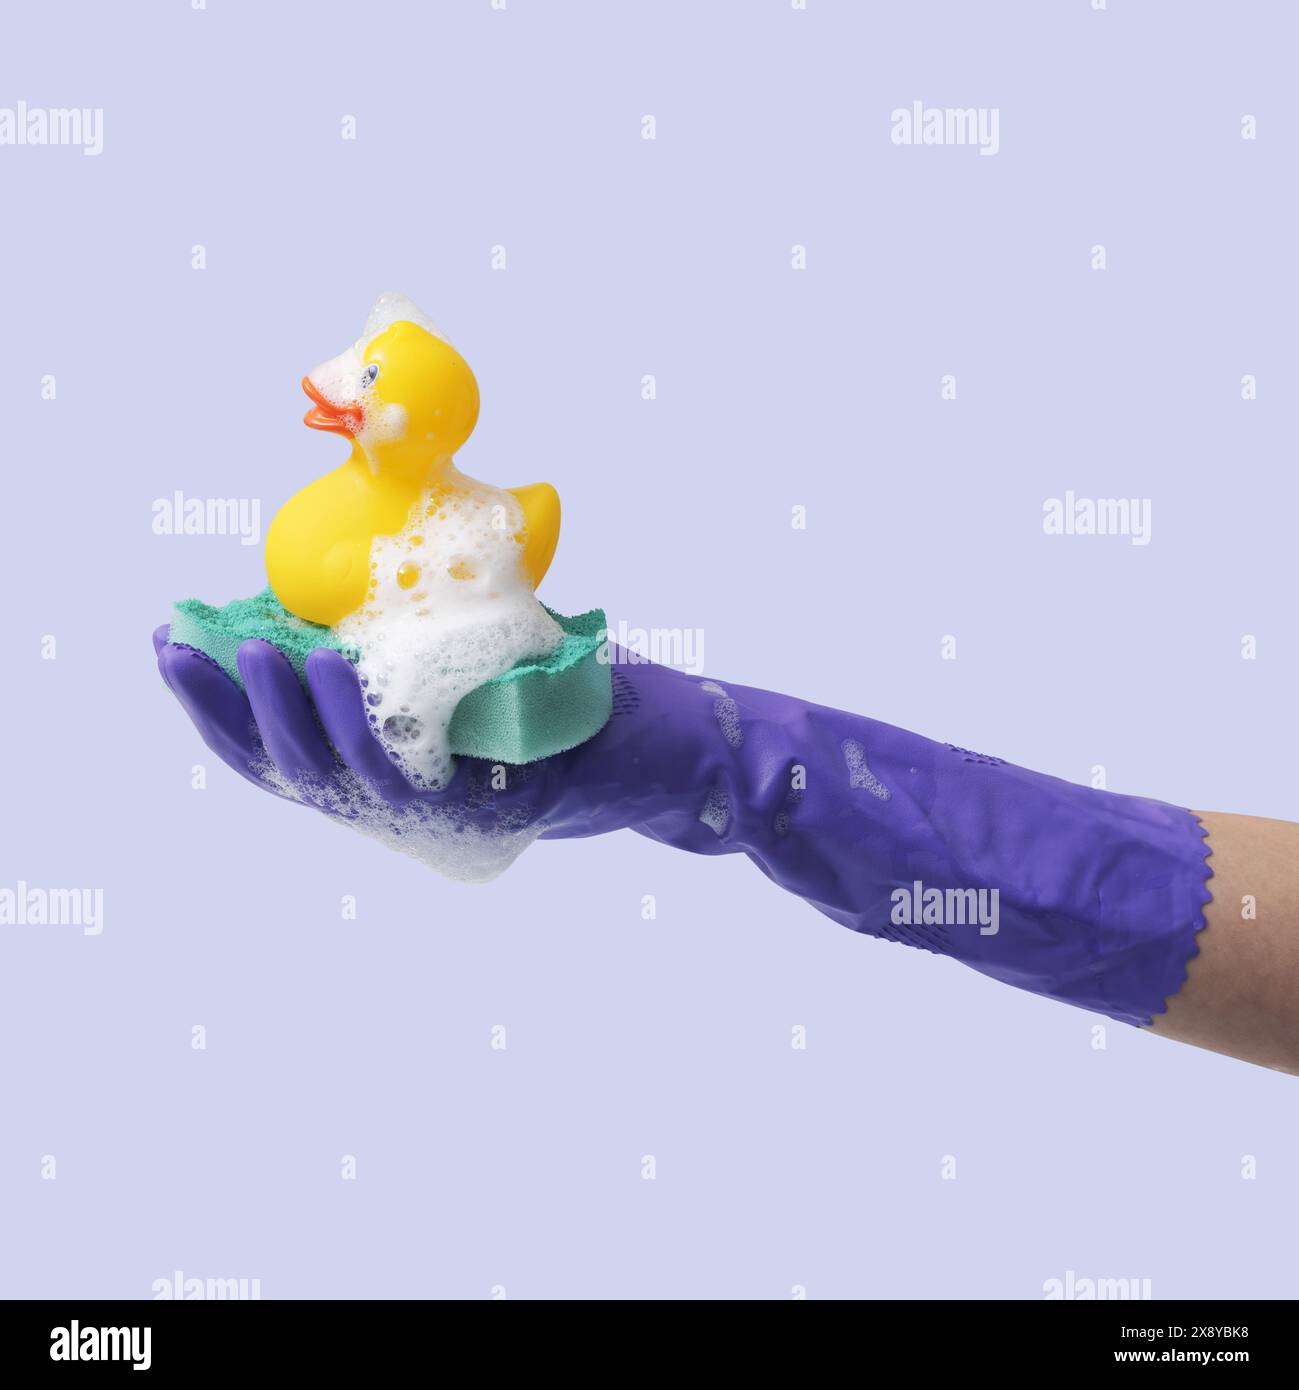 Female hand holding a soapy cleaning sponge and a rubber duck, hygiene and housecleaning concept Stock Photo